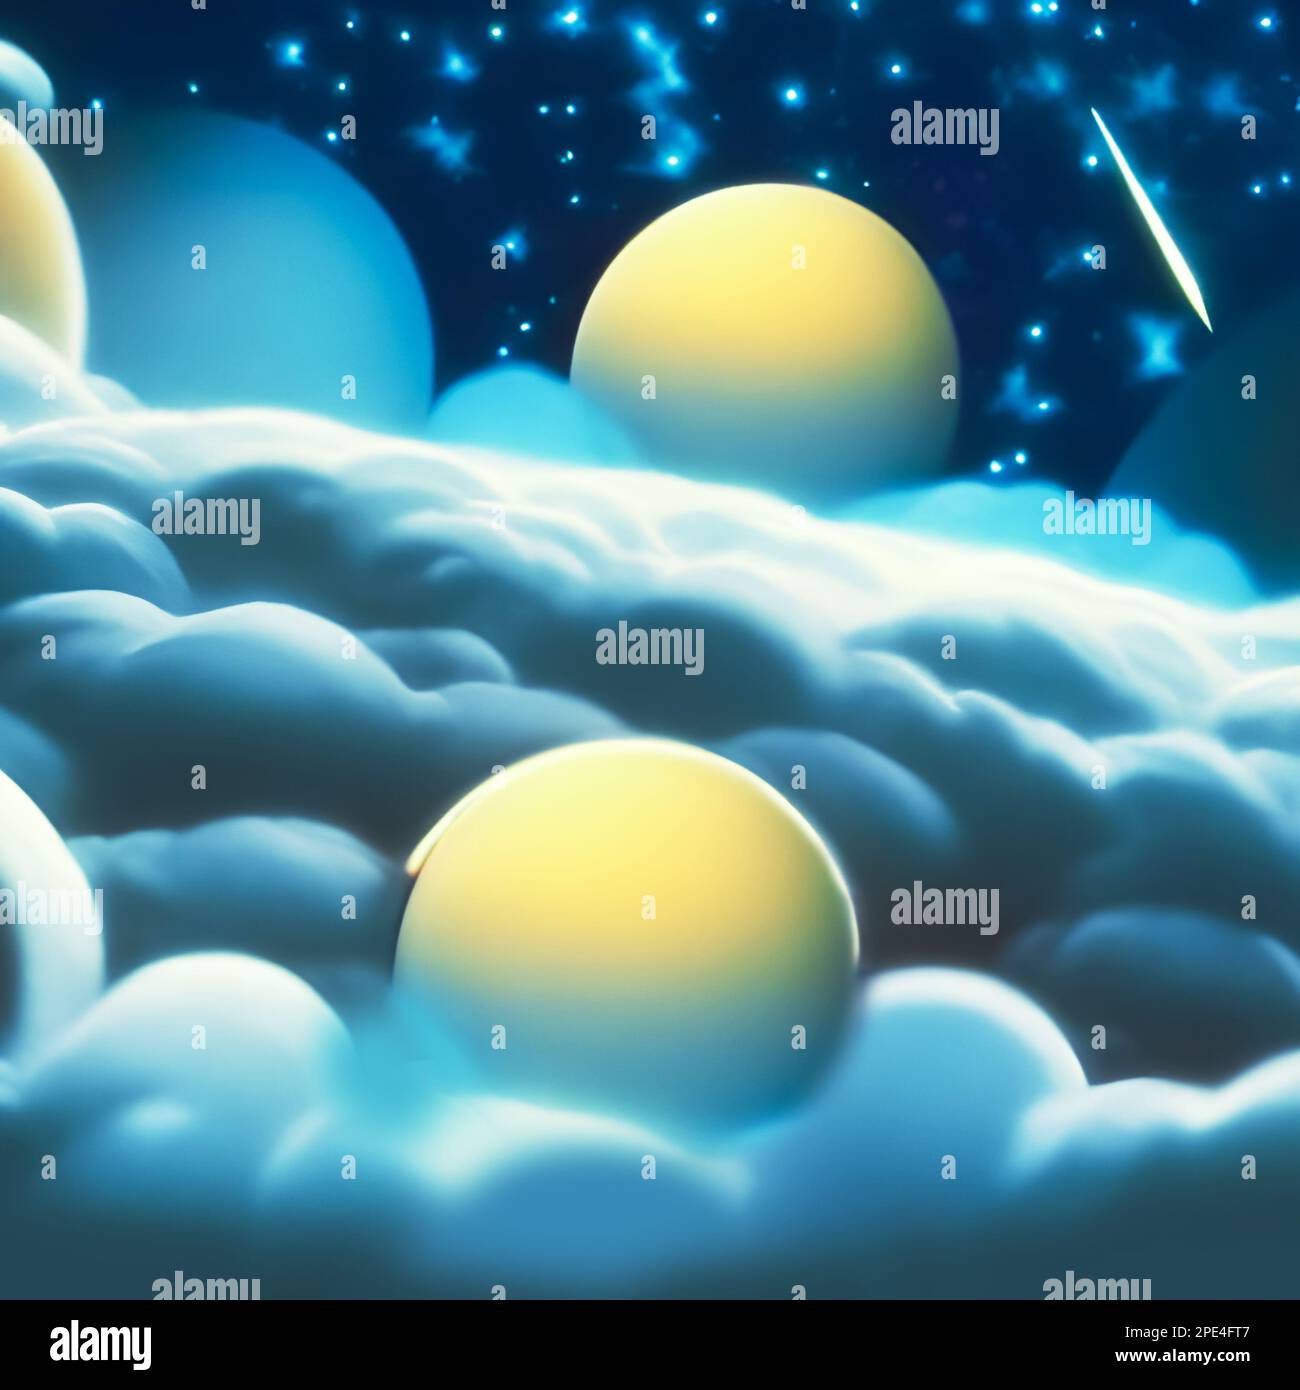 Outer space design for children's applications. Stock Photo